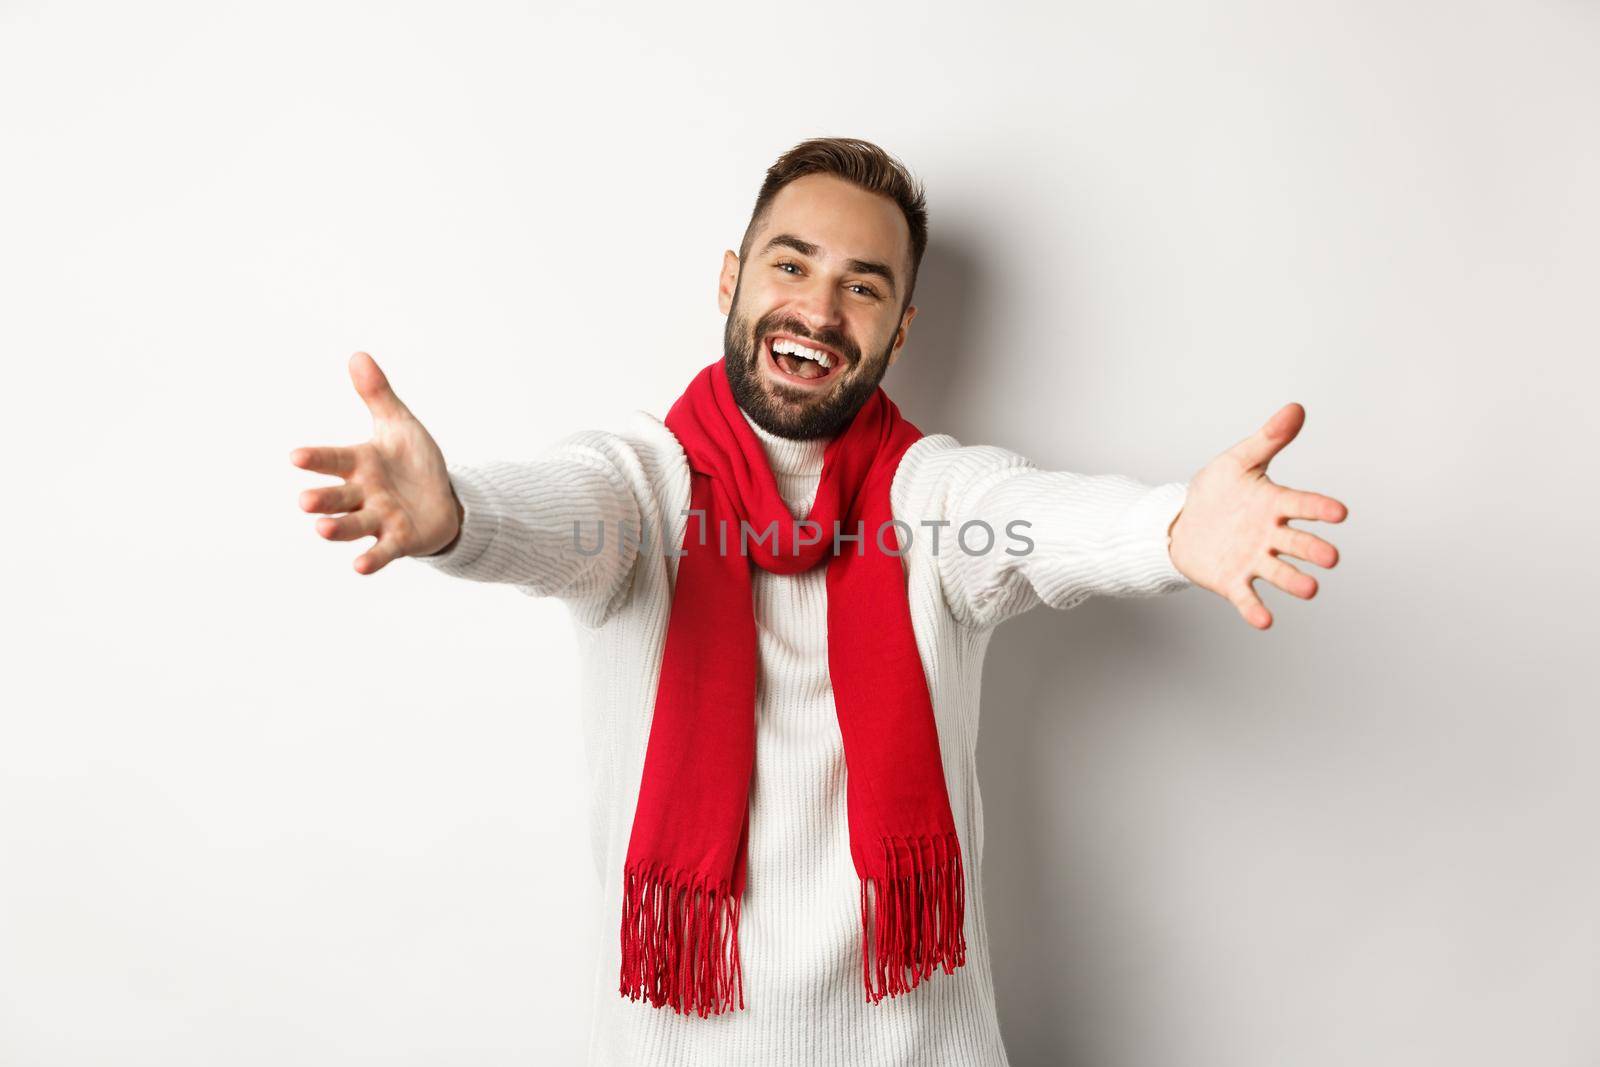 Christmas holidays and celebration concept. Friendly man inviting to come in, reaching hands forward in greeting or hug gesture, wishing happy new year, standing over white background.